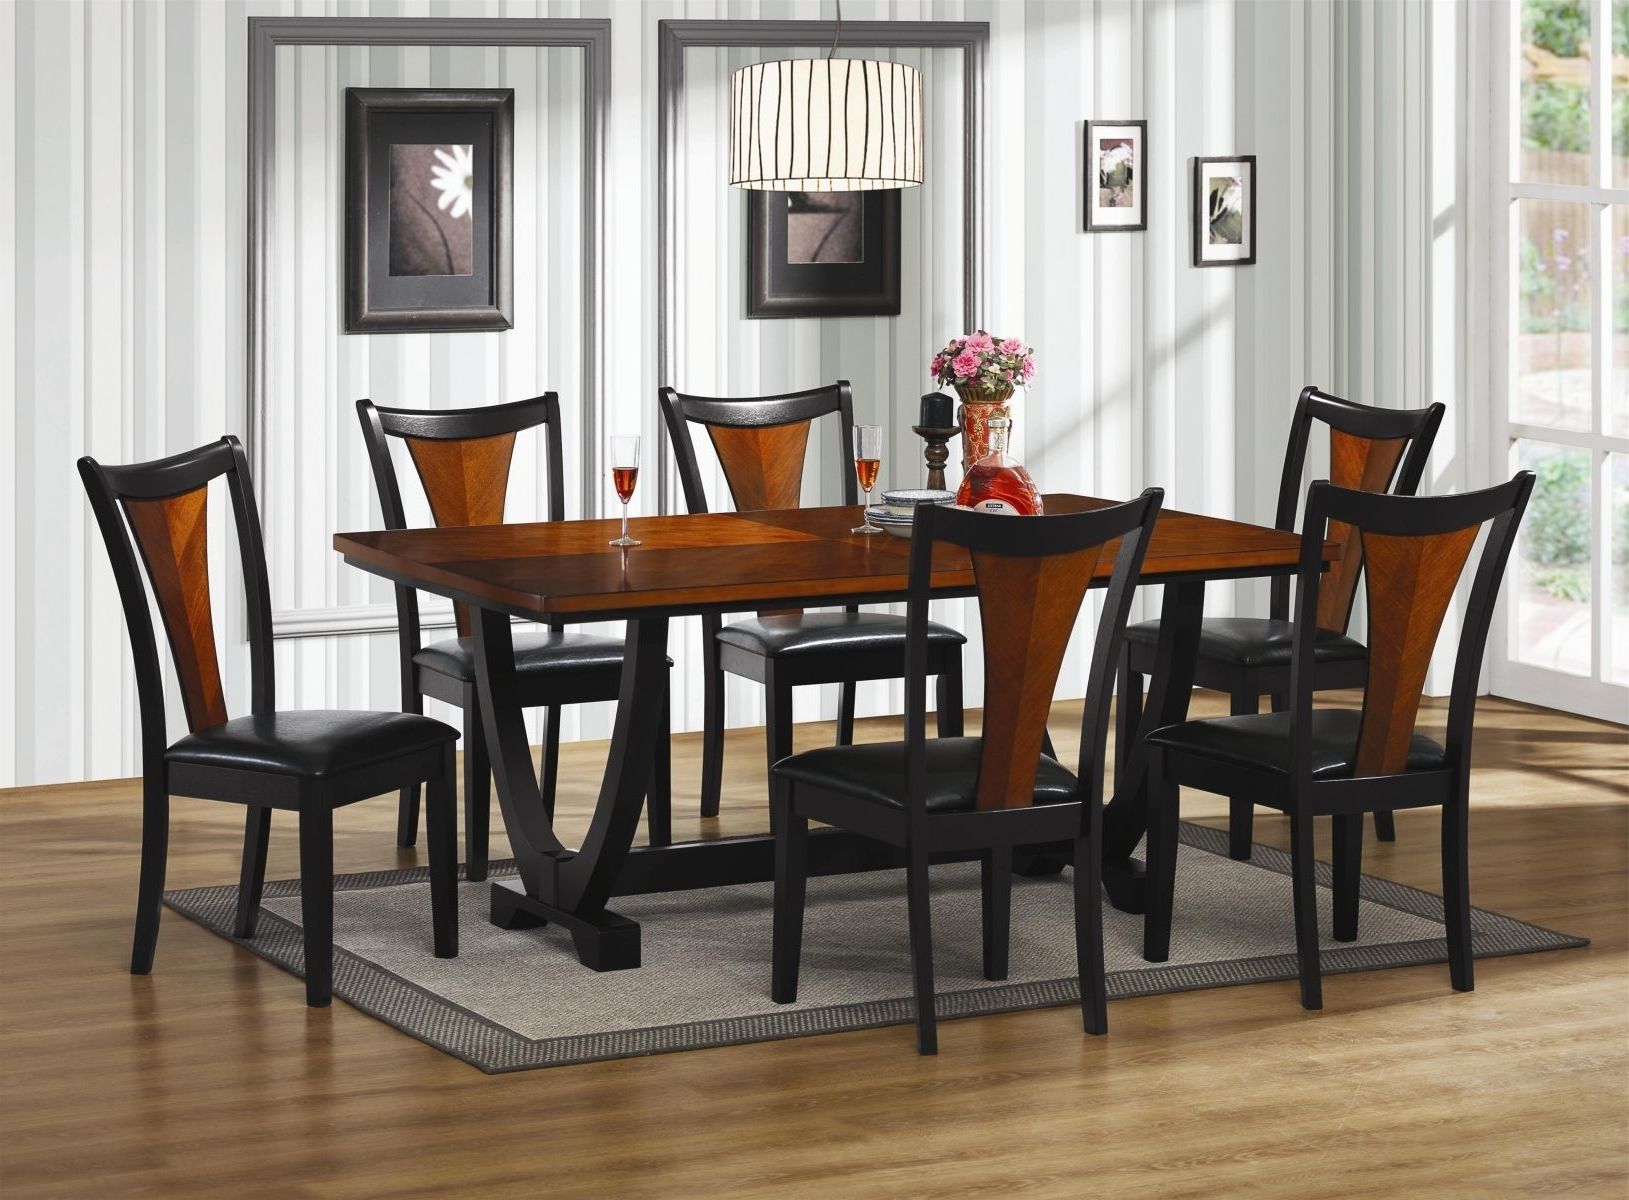 China Dining Room Contemproary Furnishing (View 10 of 10)